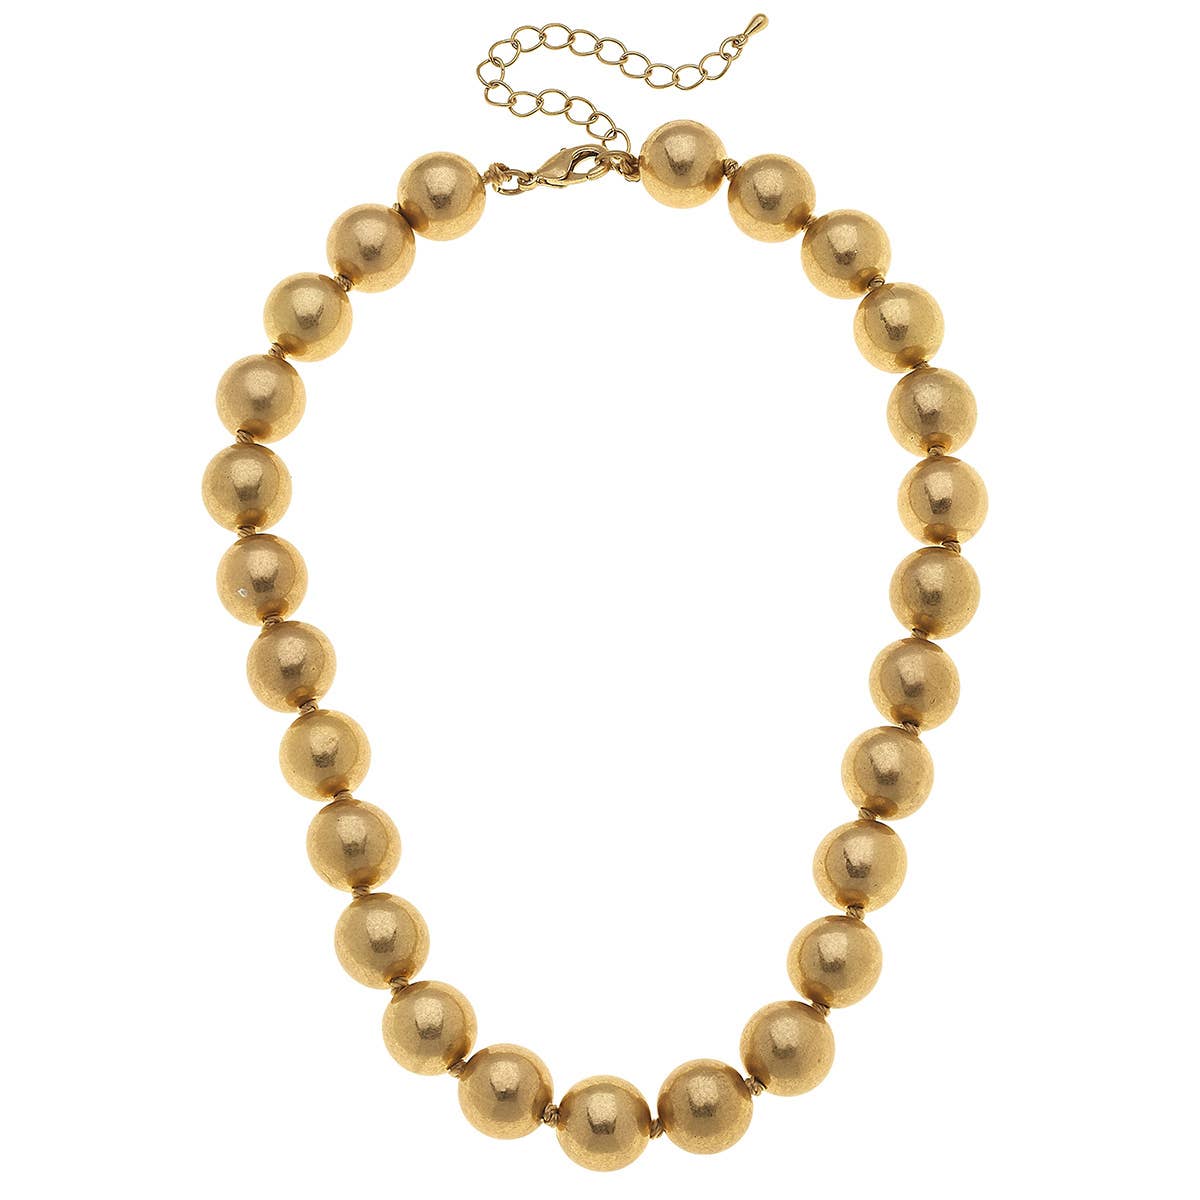 Eleanor 14MM Hand-Knotted Ball Bead Necklace in Worn Gold